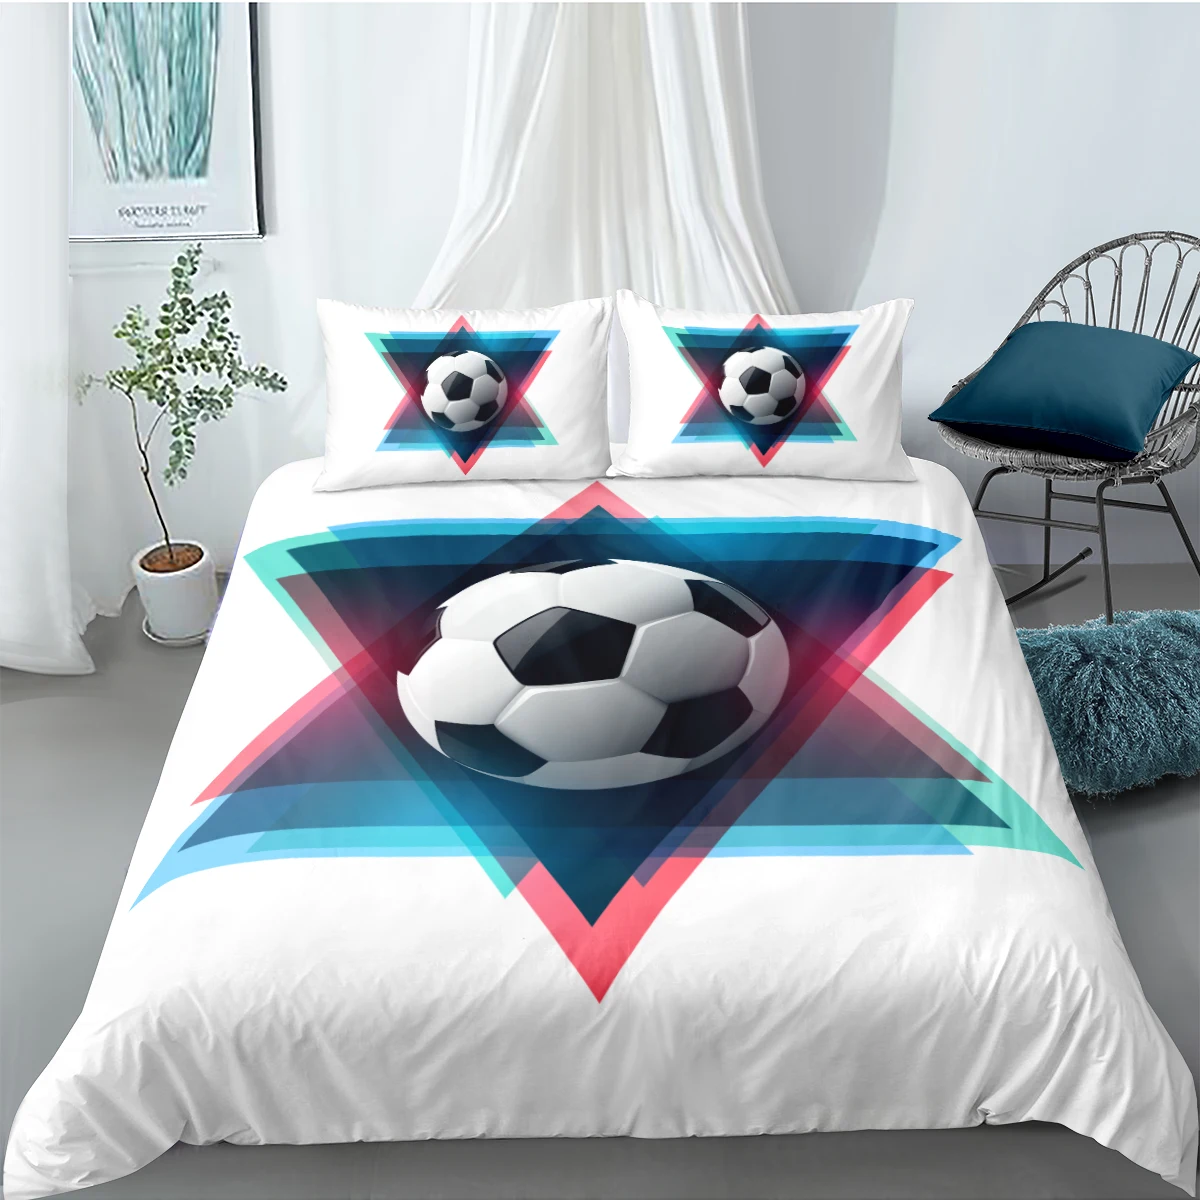 

Modern Comforter Cases 3D Football Duvet Cover Sets Pillow Slips King Queen Super King Twin Size 180*210cm White Bedclothes